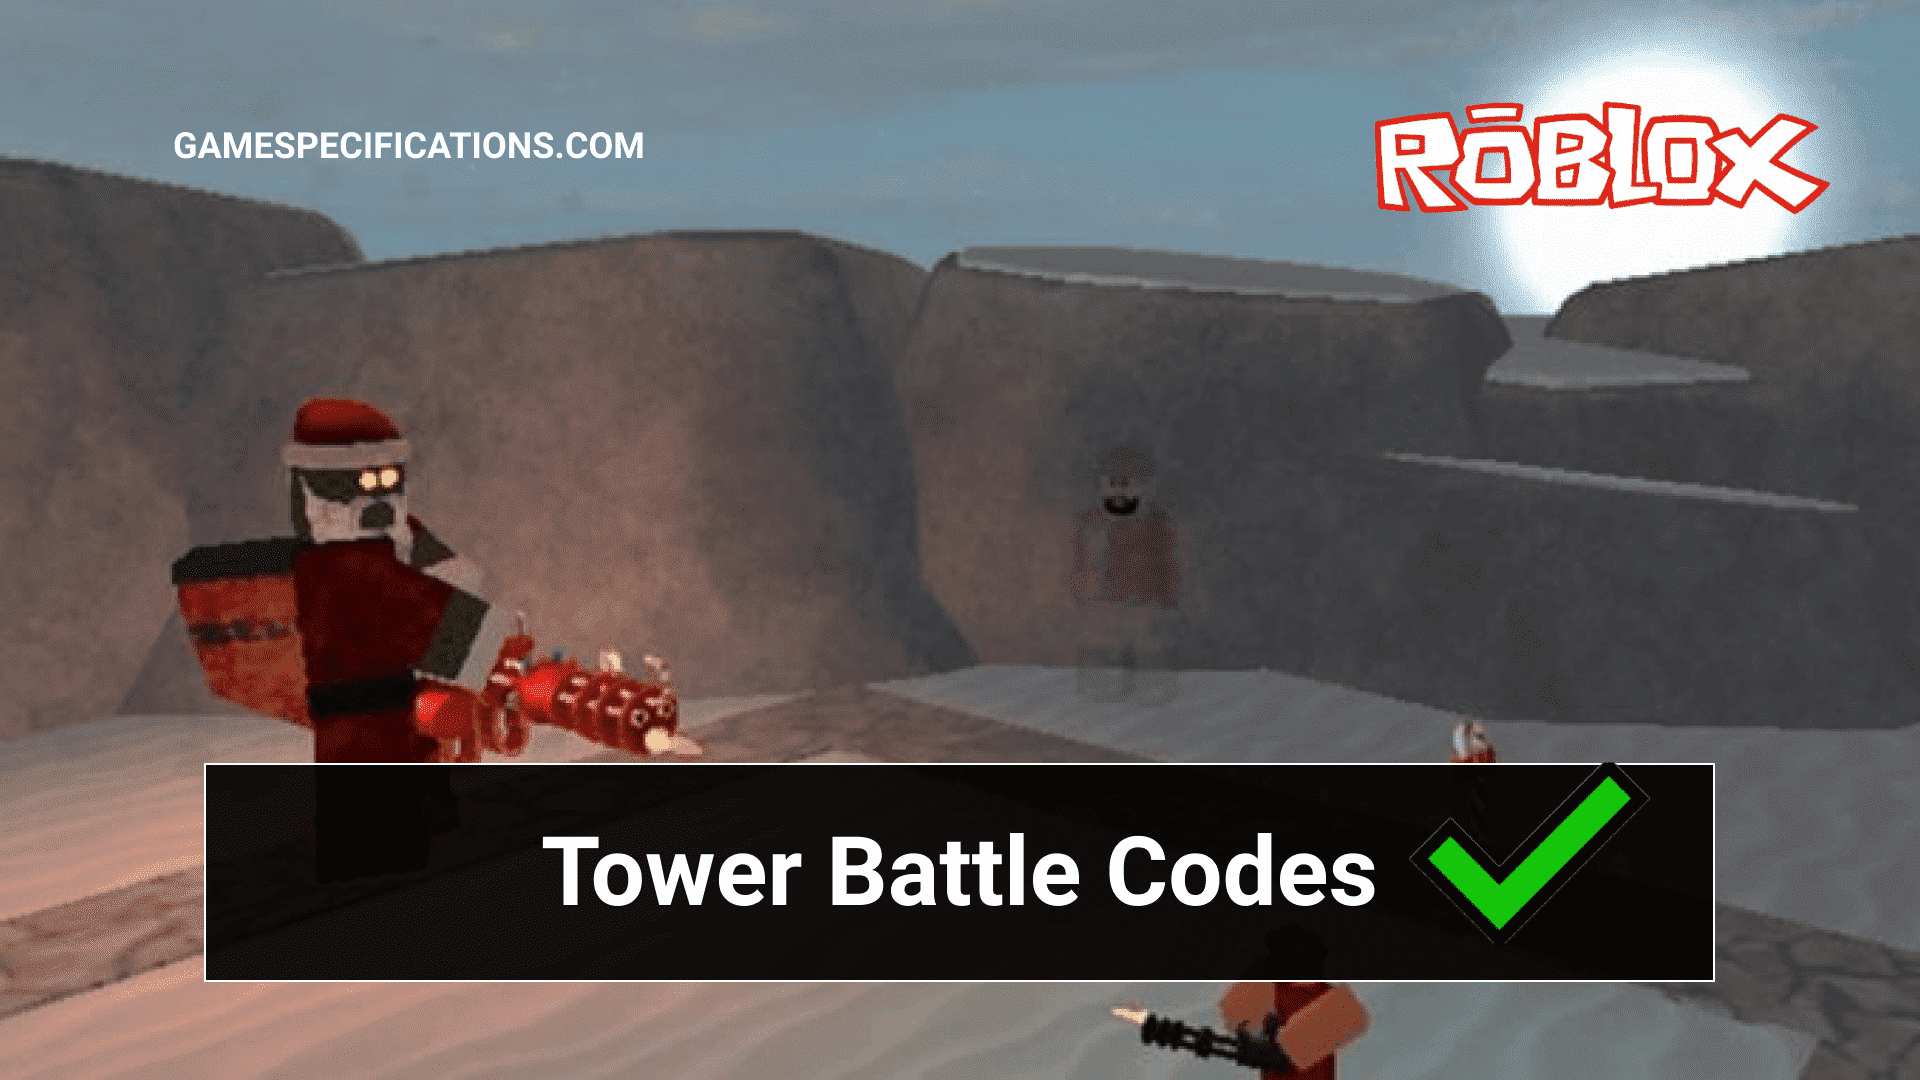 Roblox Tower Battles Codes July 2021 Game Specifications - roblox deathrun codes twitter